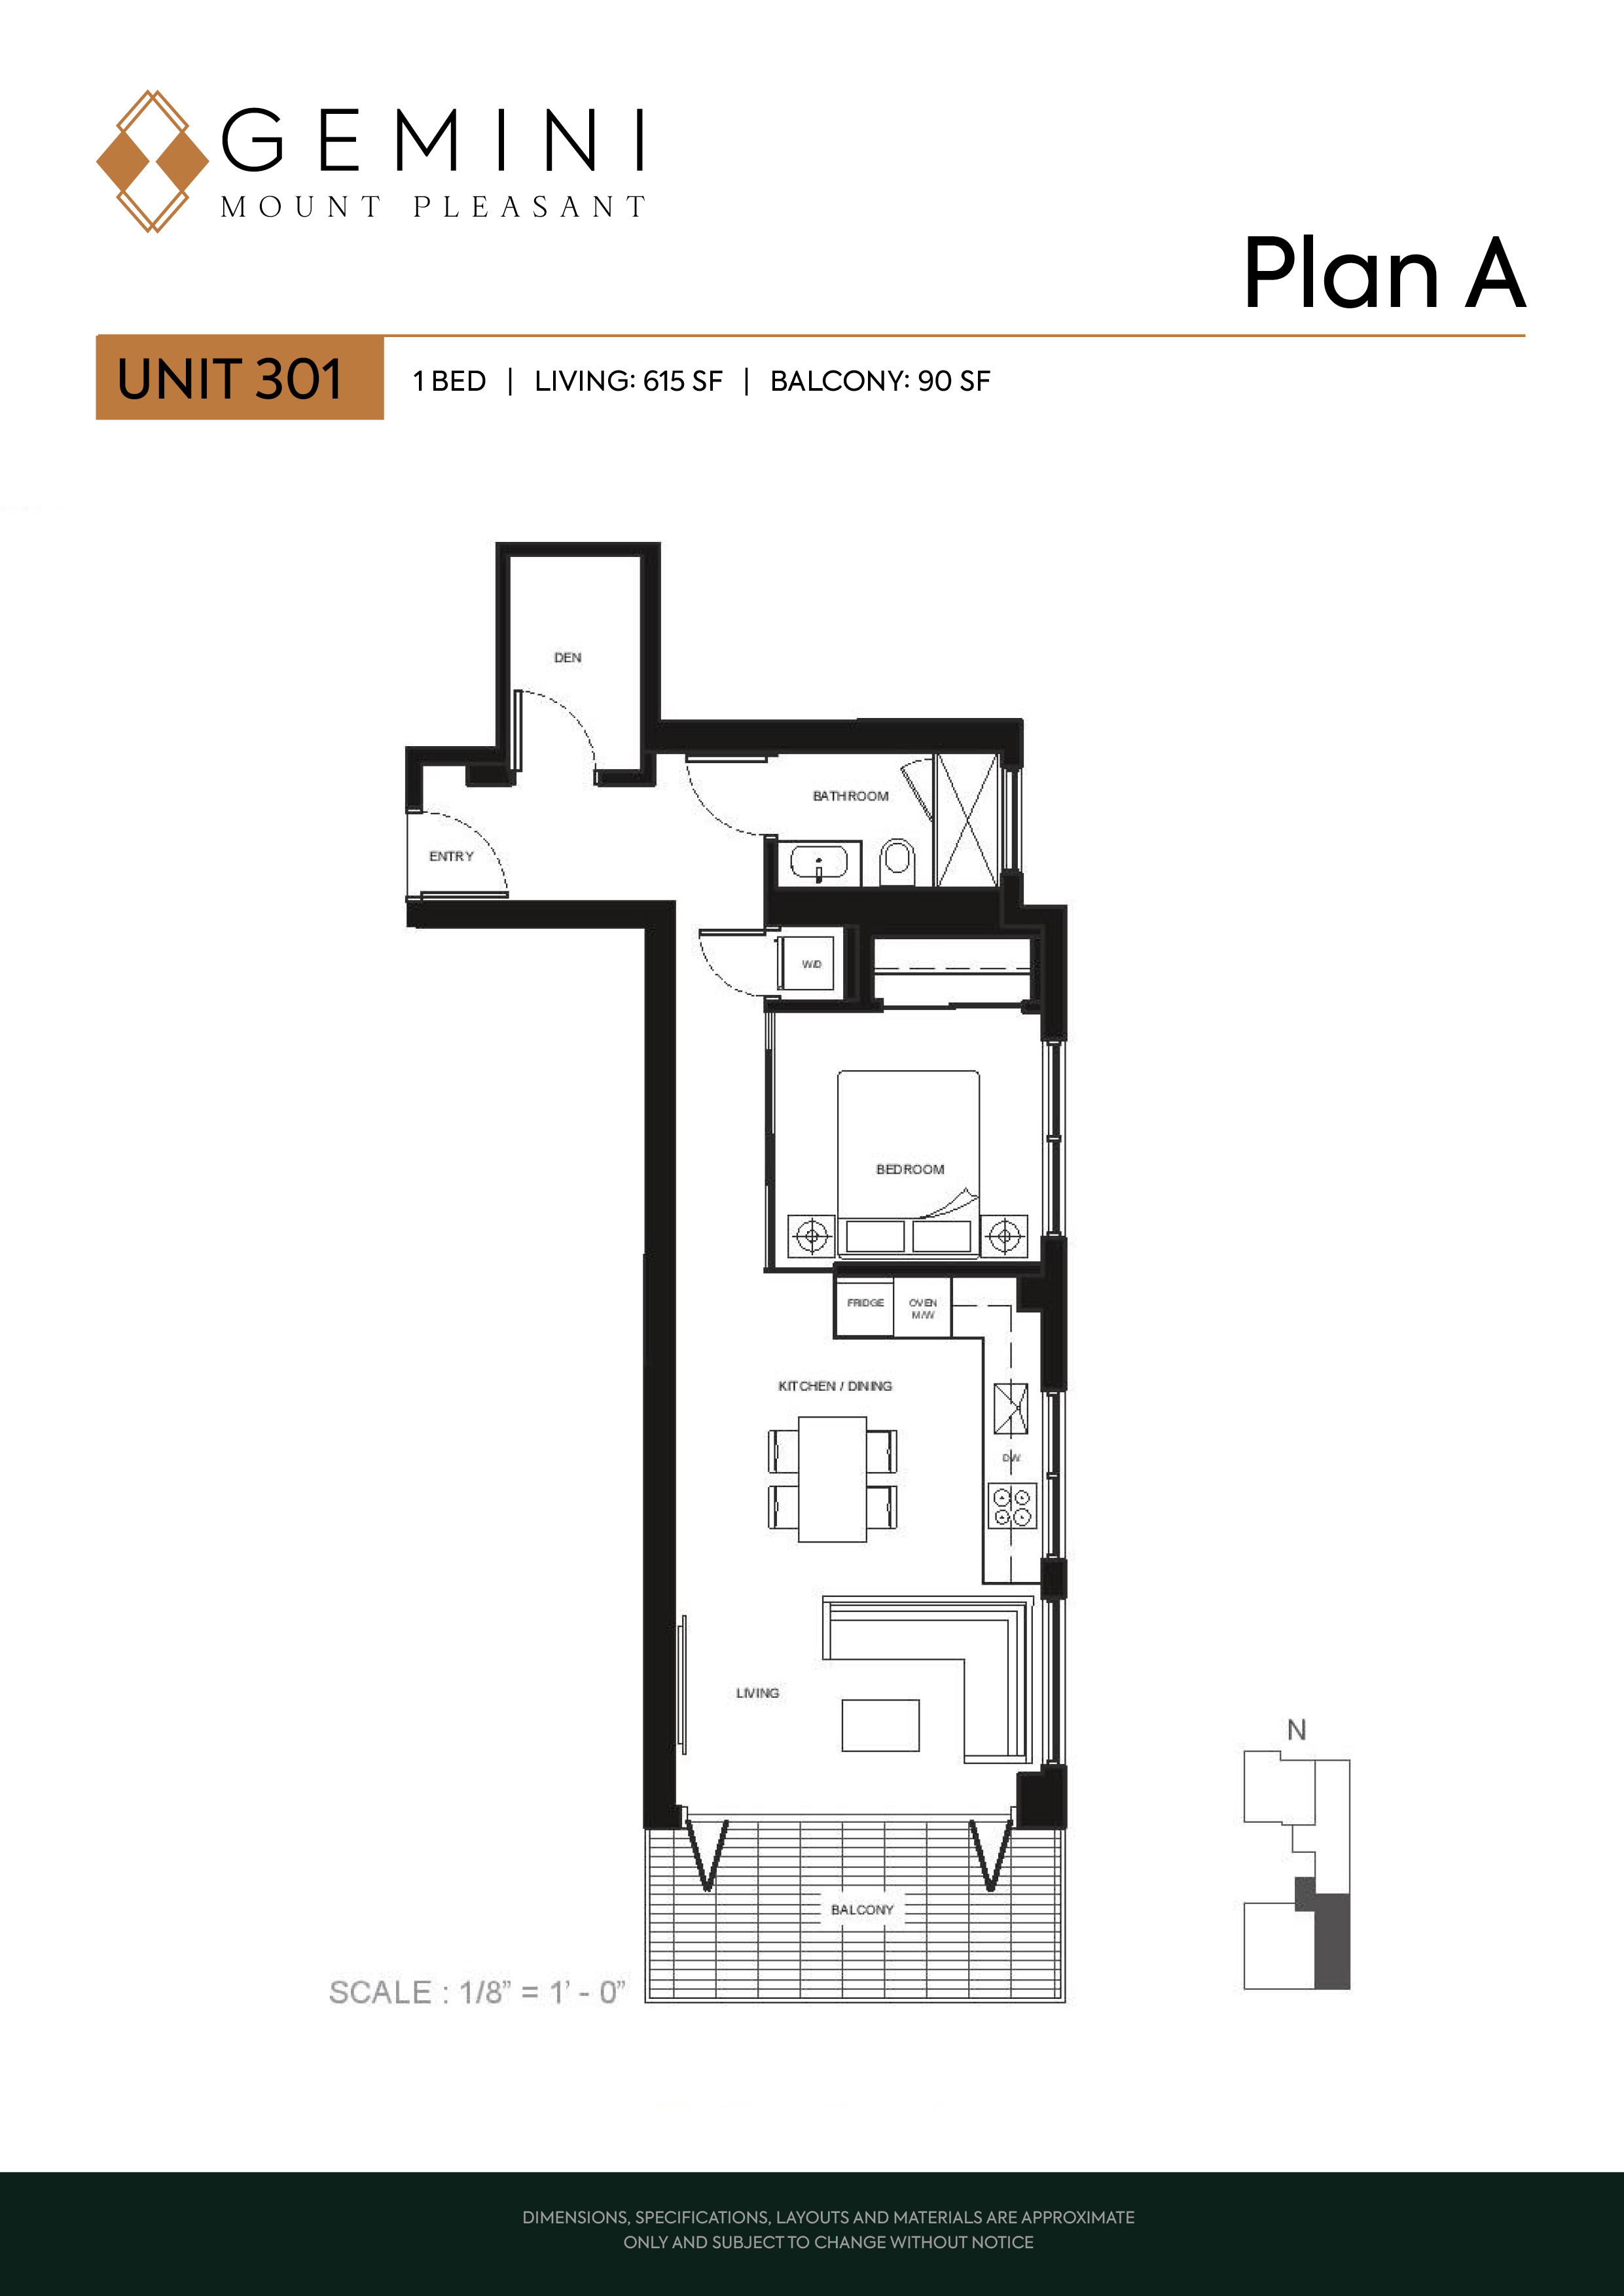 Plan A Floor Plan of Gemini Mount Pleasant Condos with undefined beds